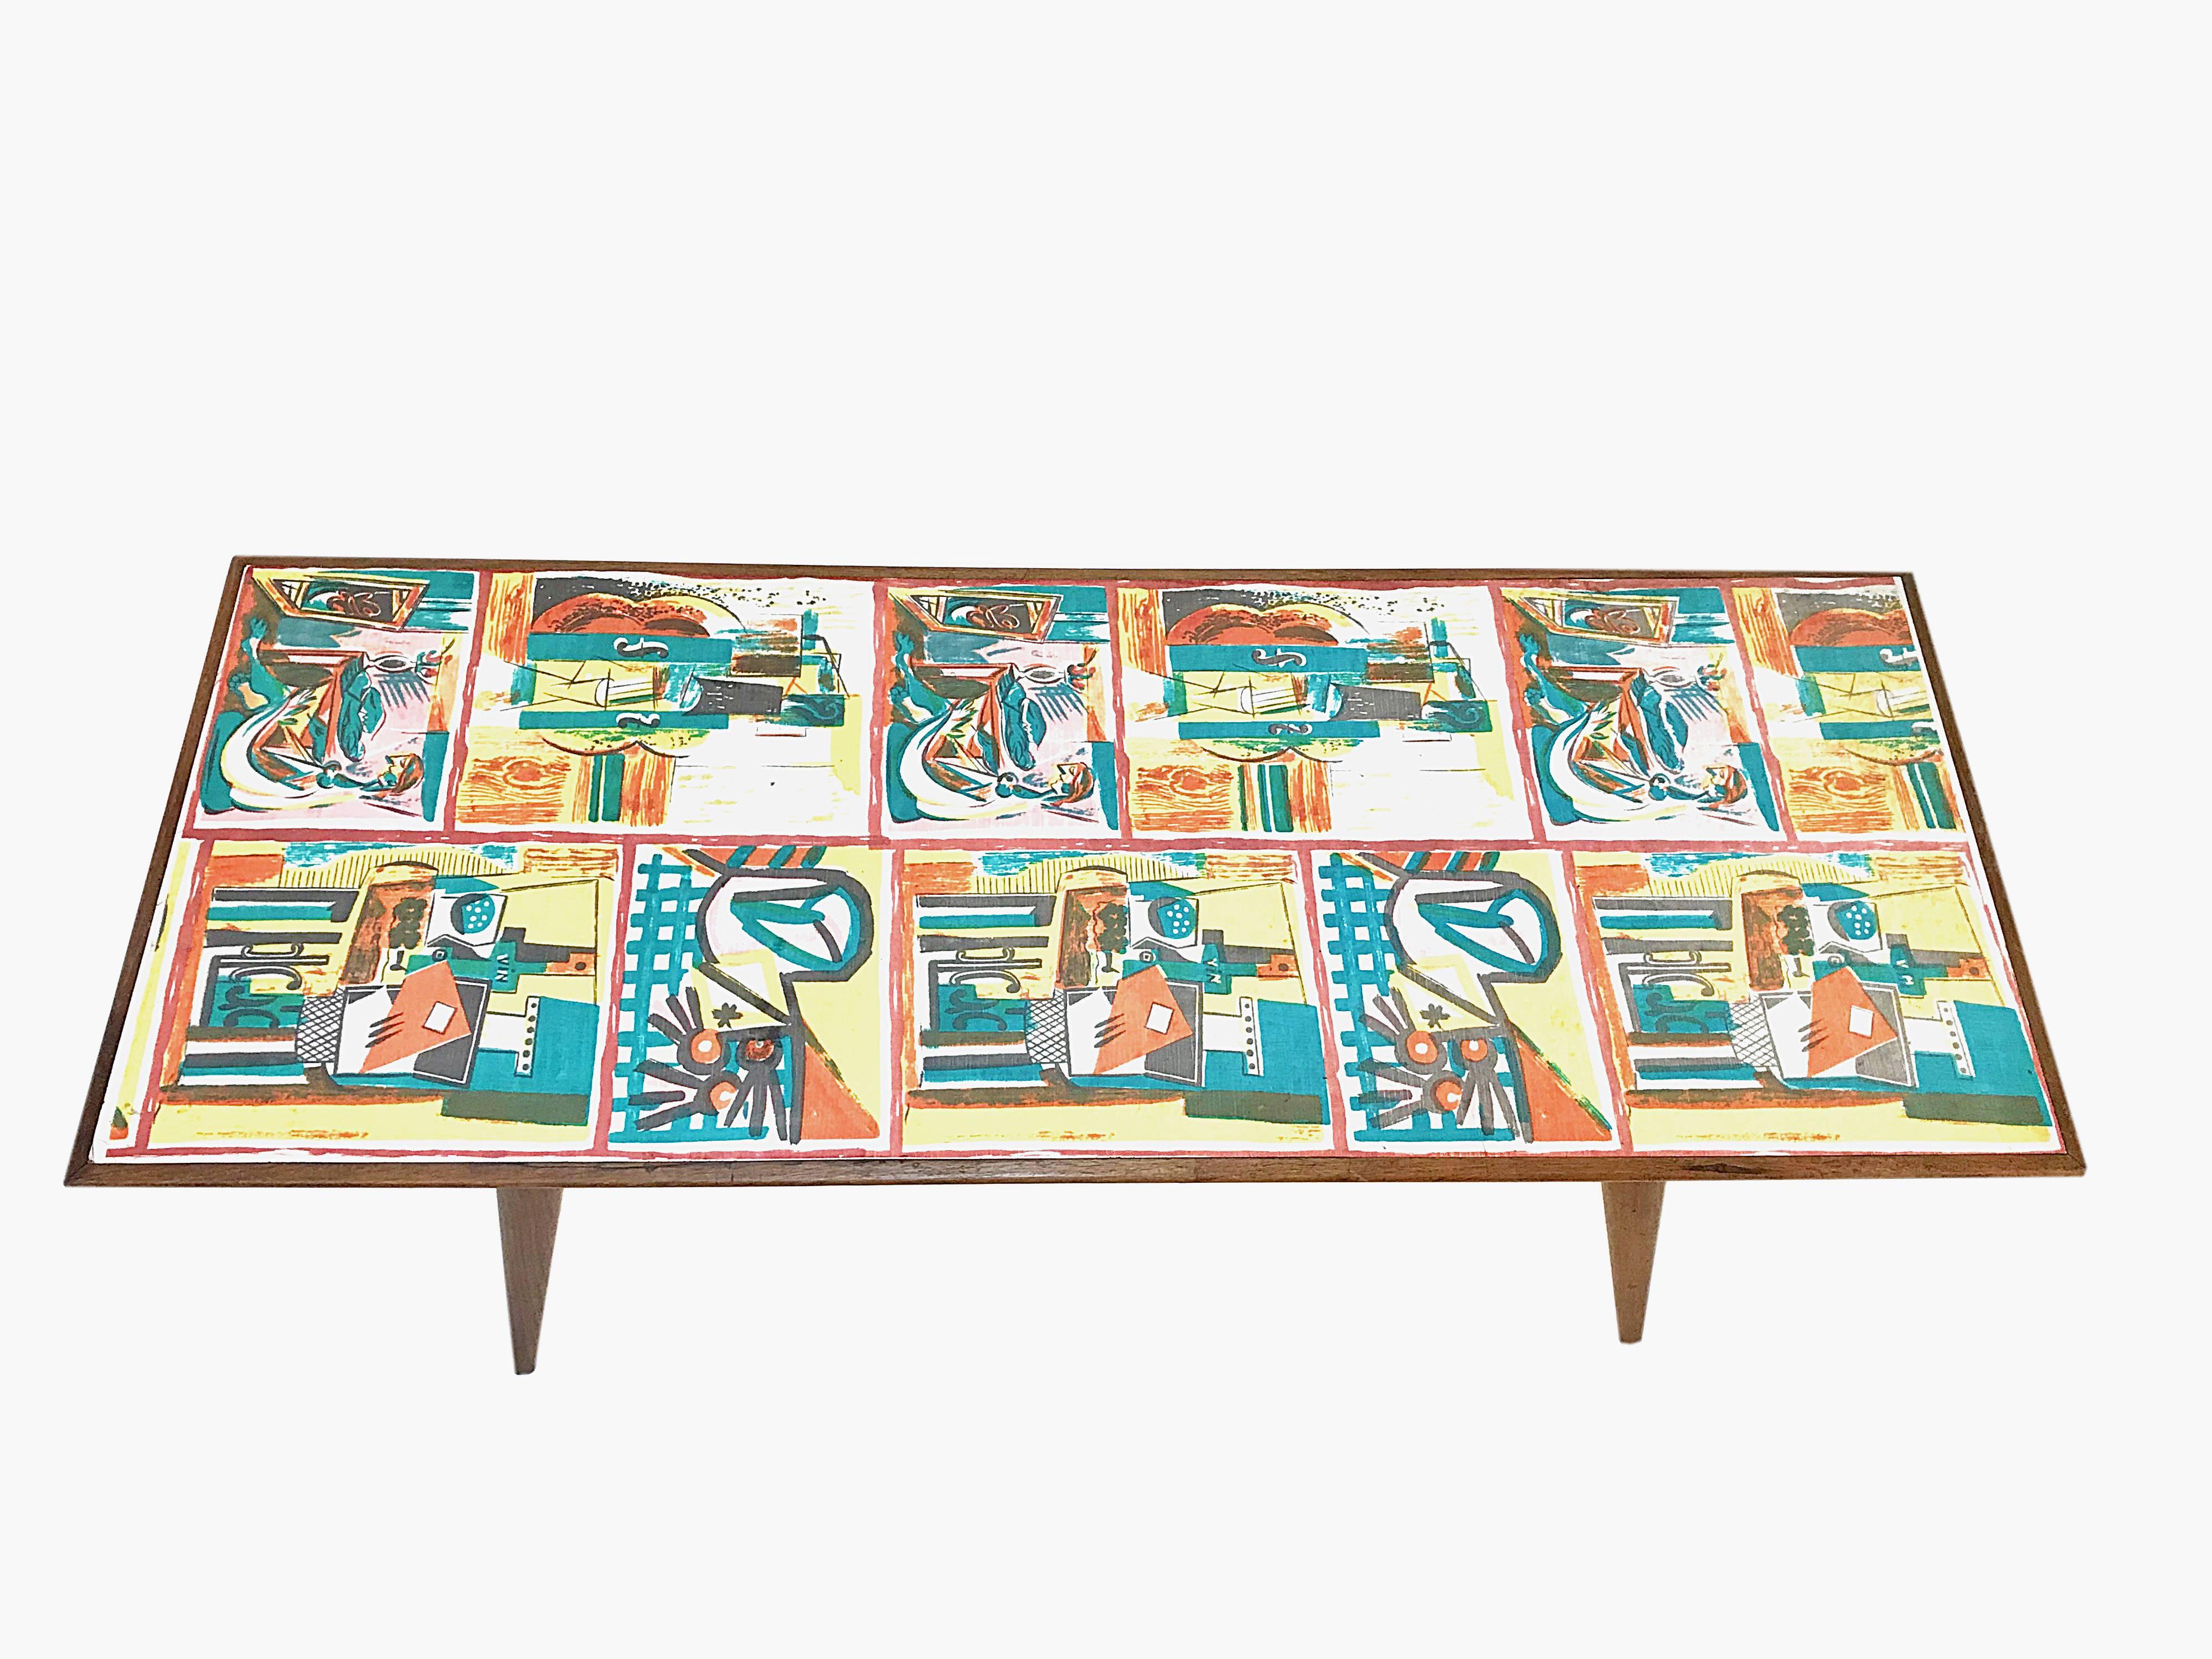 Midcentury Printed Wood and Plastic Italian Coffee Table after De Poli, 1950s For Sale 1